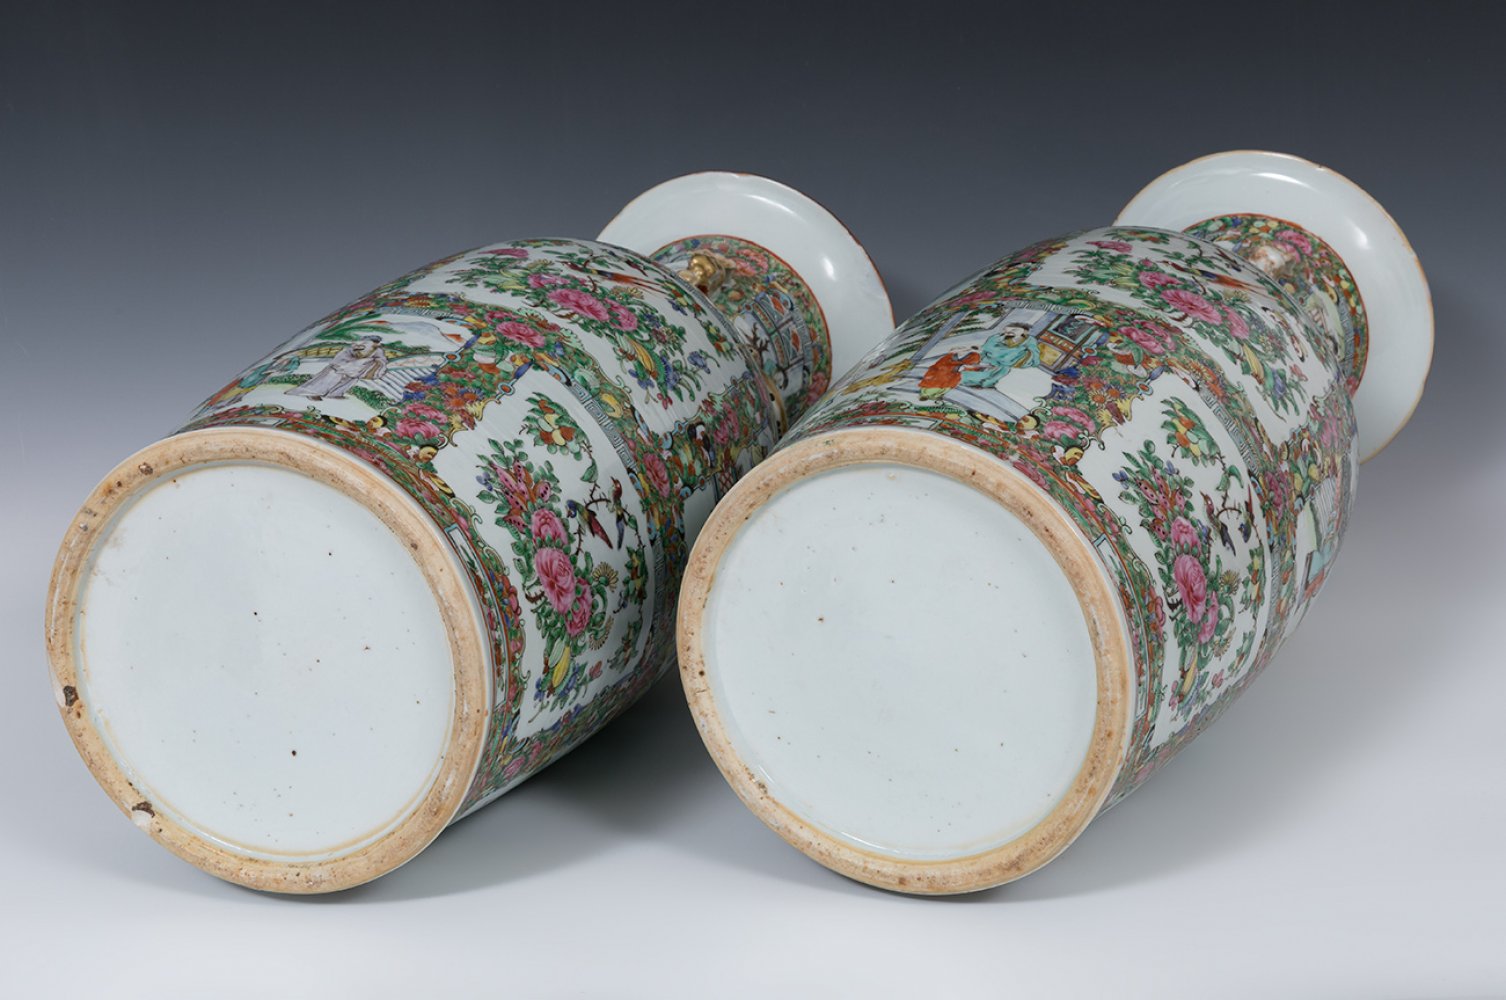 Pair of vases after models of the Green Family; Canton, China 19th century.Enamelled porcelain.The - Image 2 of 7